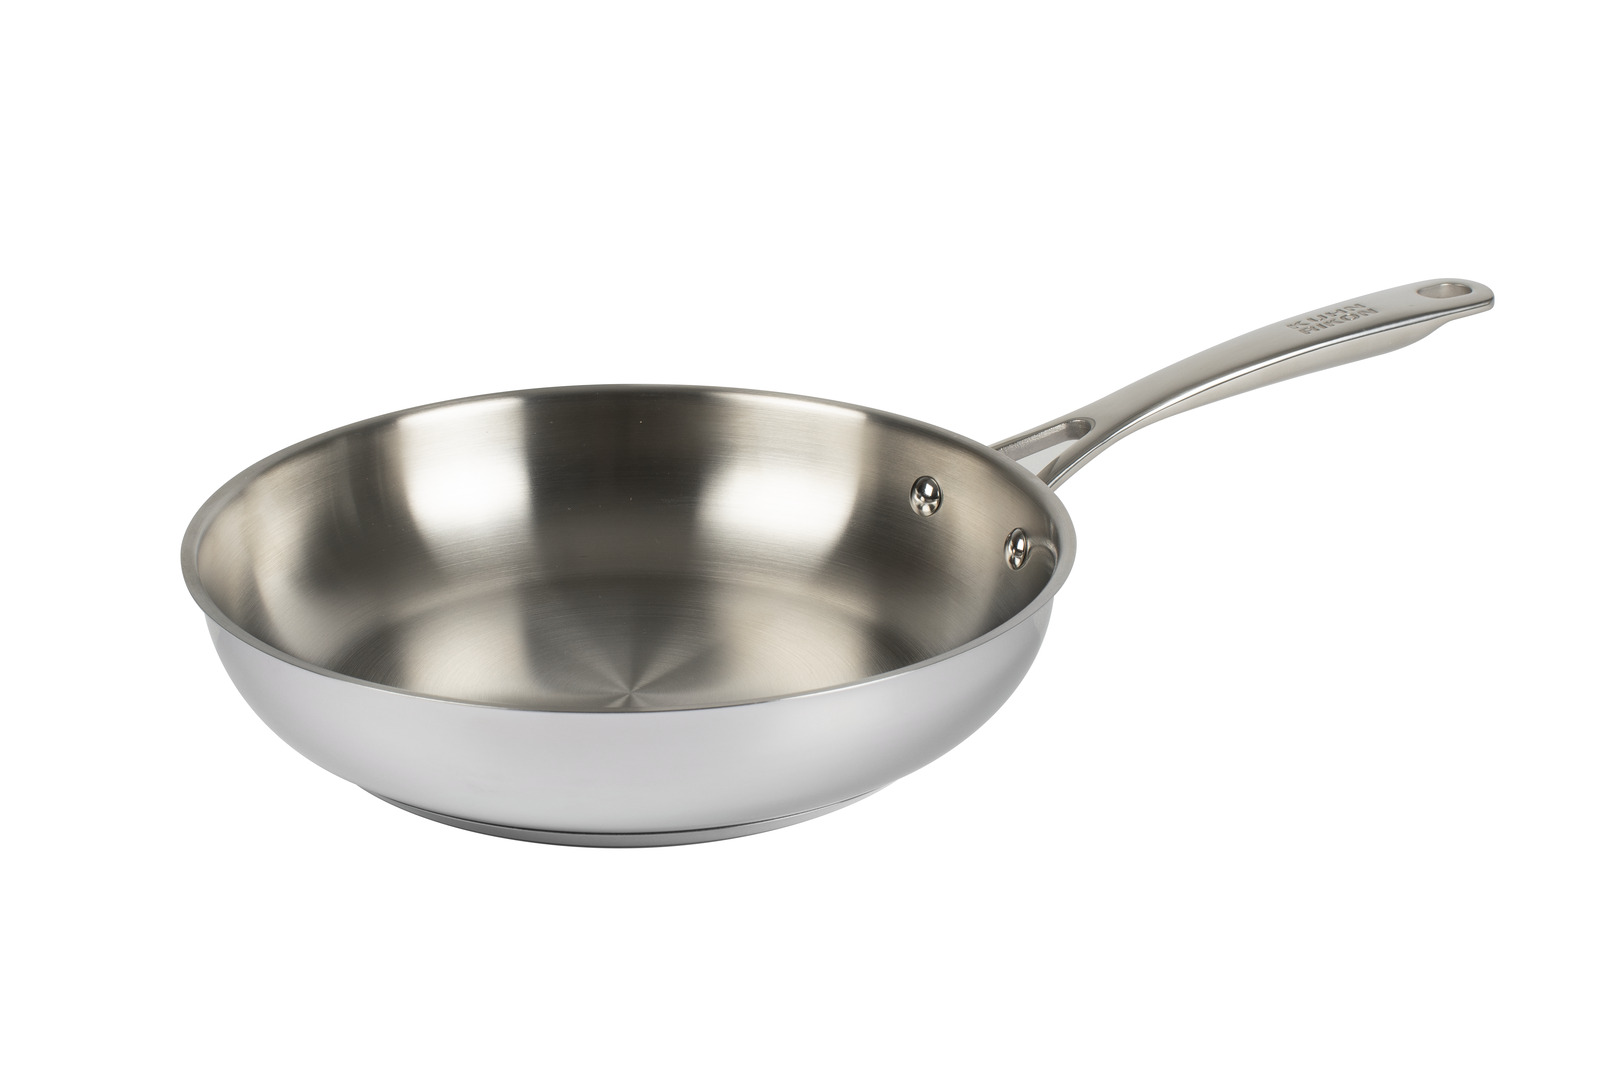 Kuhn Rikon - Allround Frying Pan Uncoated 20cm